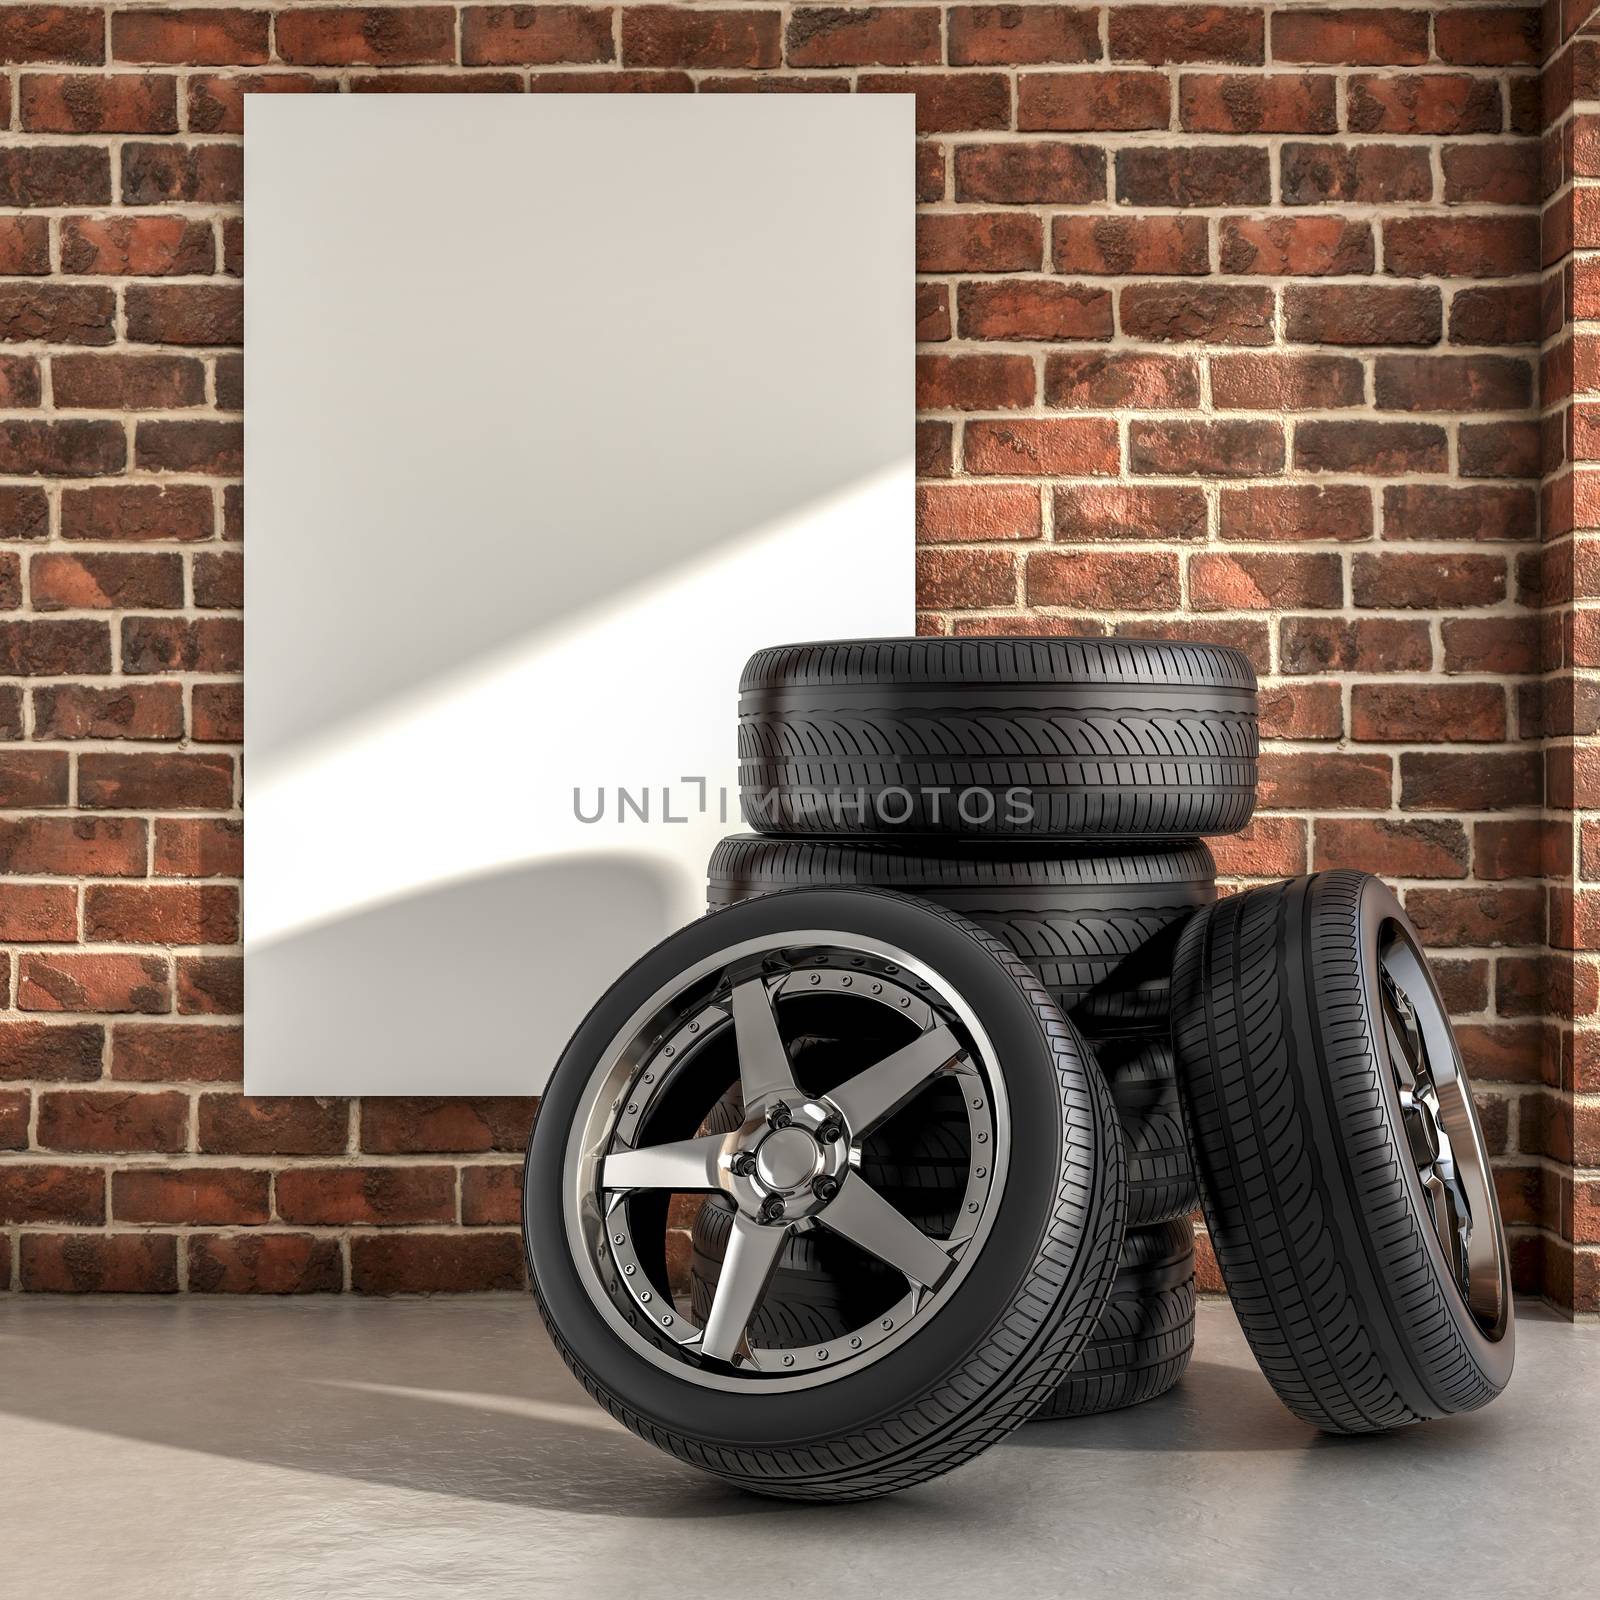 Tires on the garage by dynamicfoto